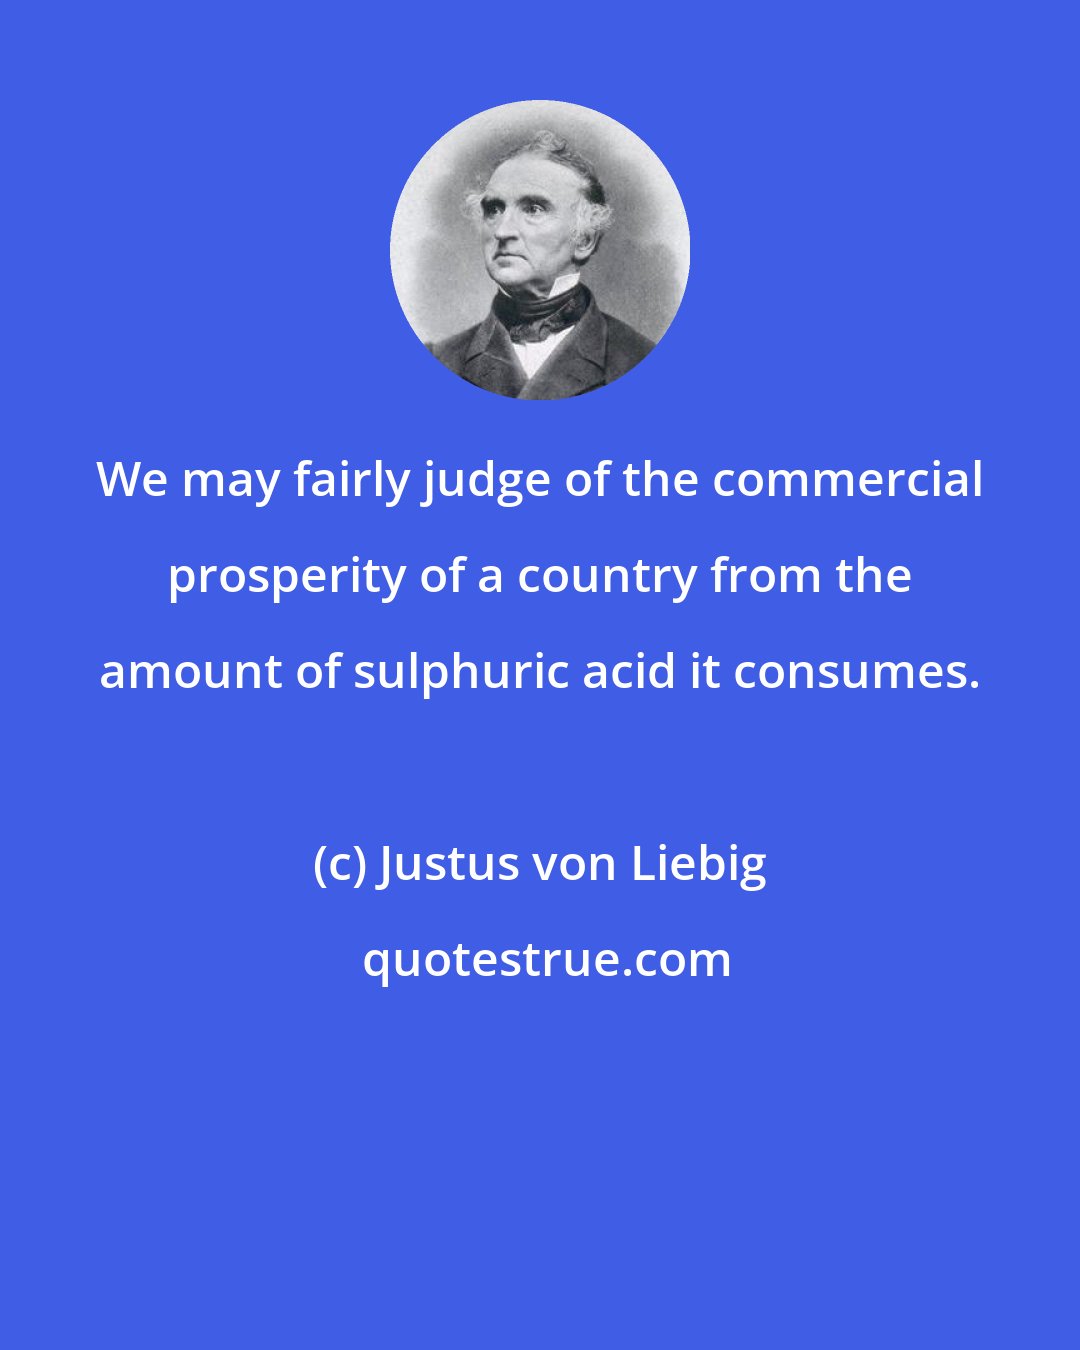 Justus von Liebig: We may fairly judge of the commercial prosperity of a country from the amount of sulphuric acid it consumes.